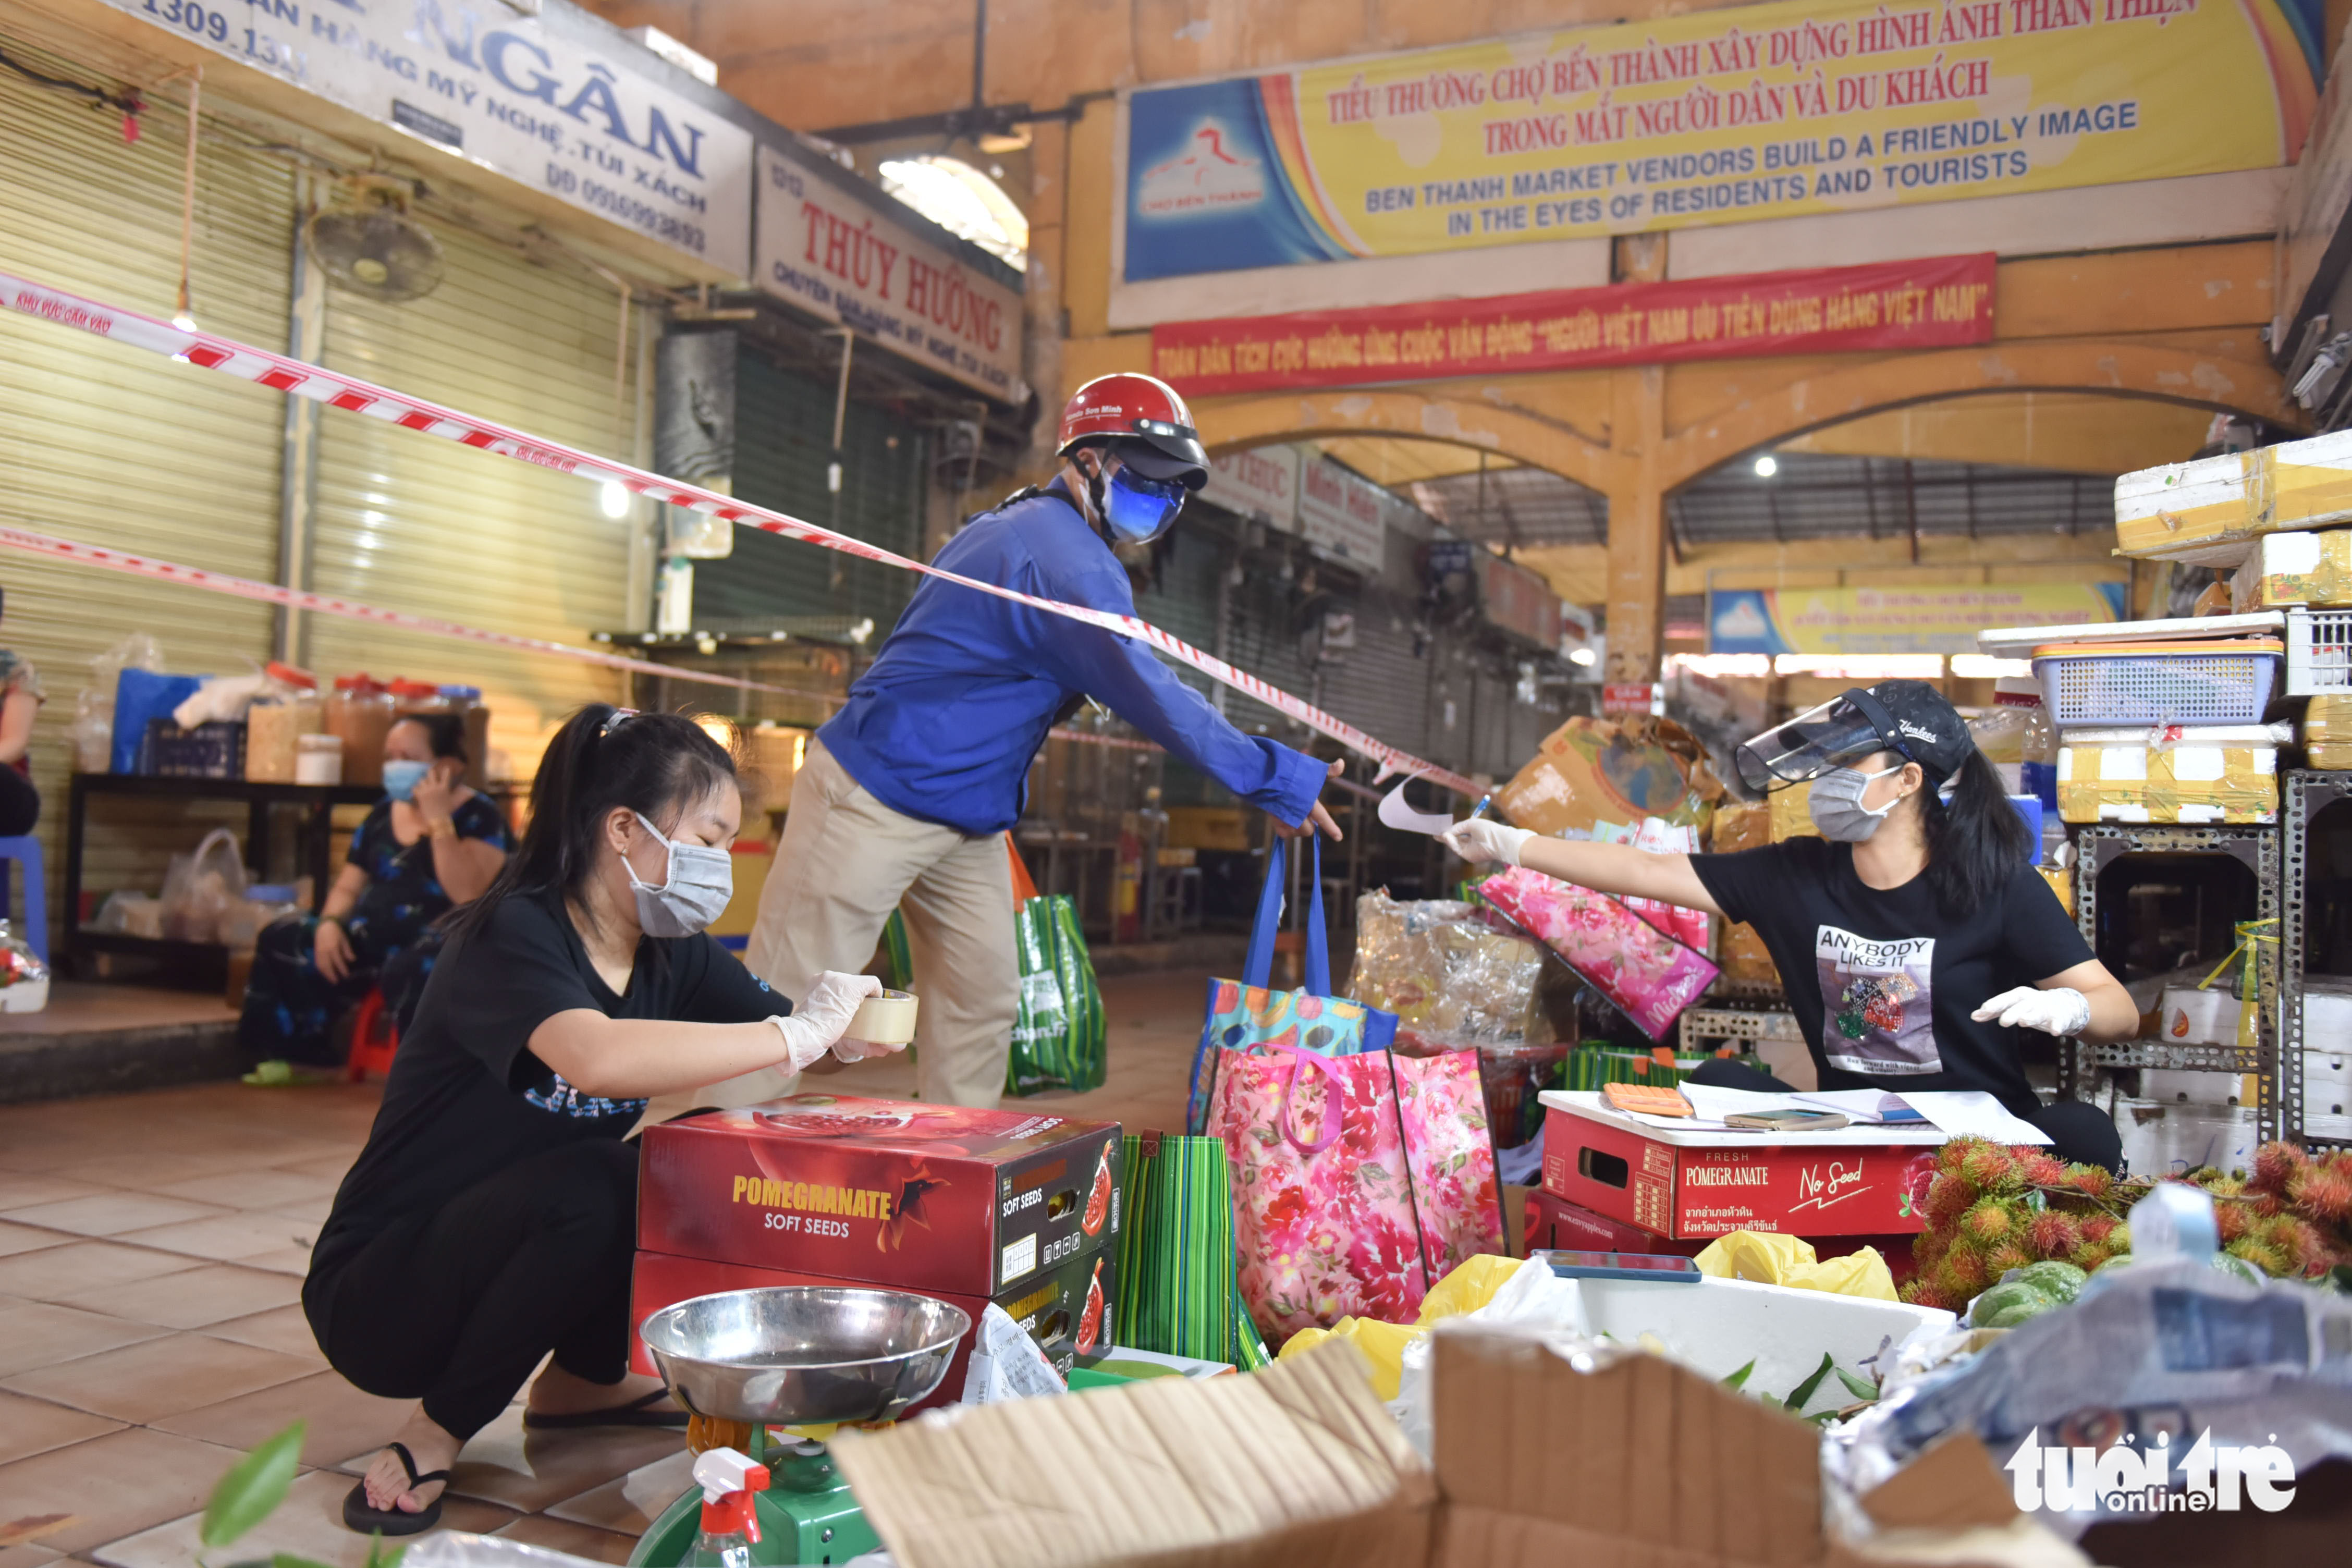 Ho Chi Minh City plans to renovate iconic Ben Thanh Market